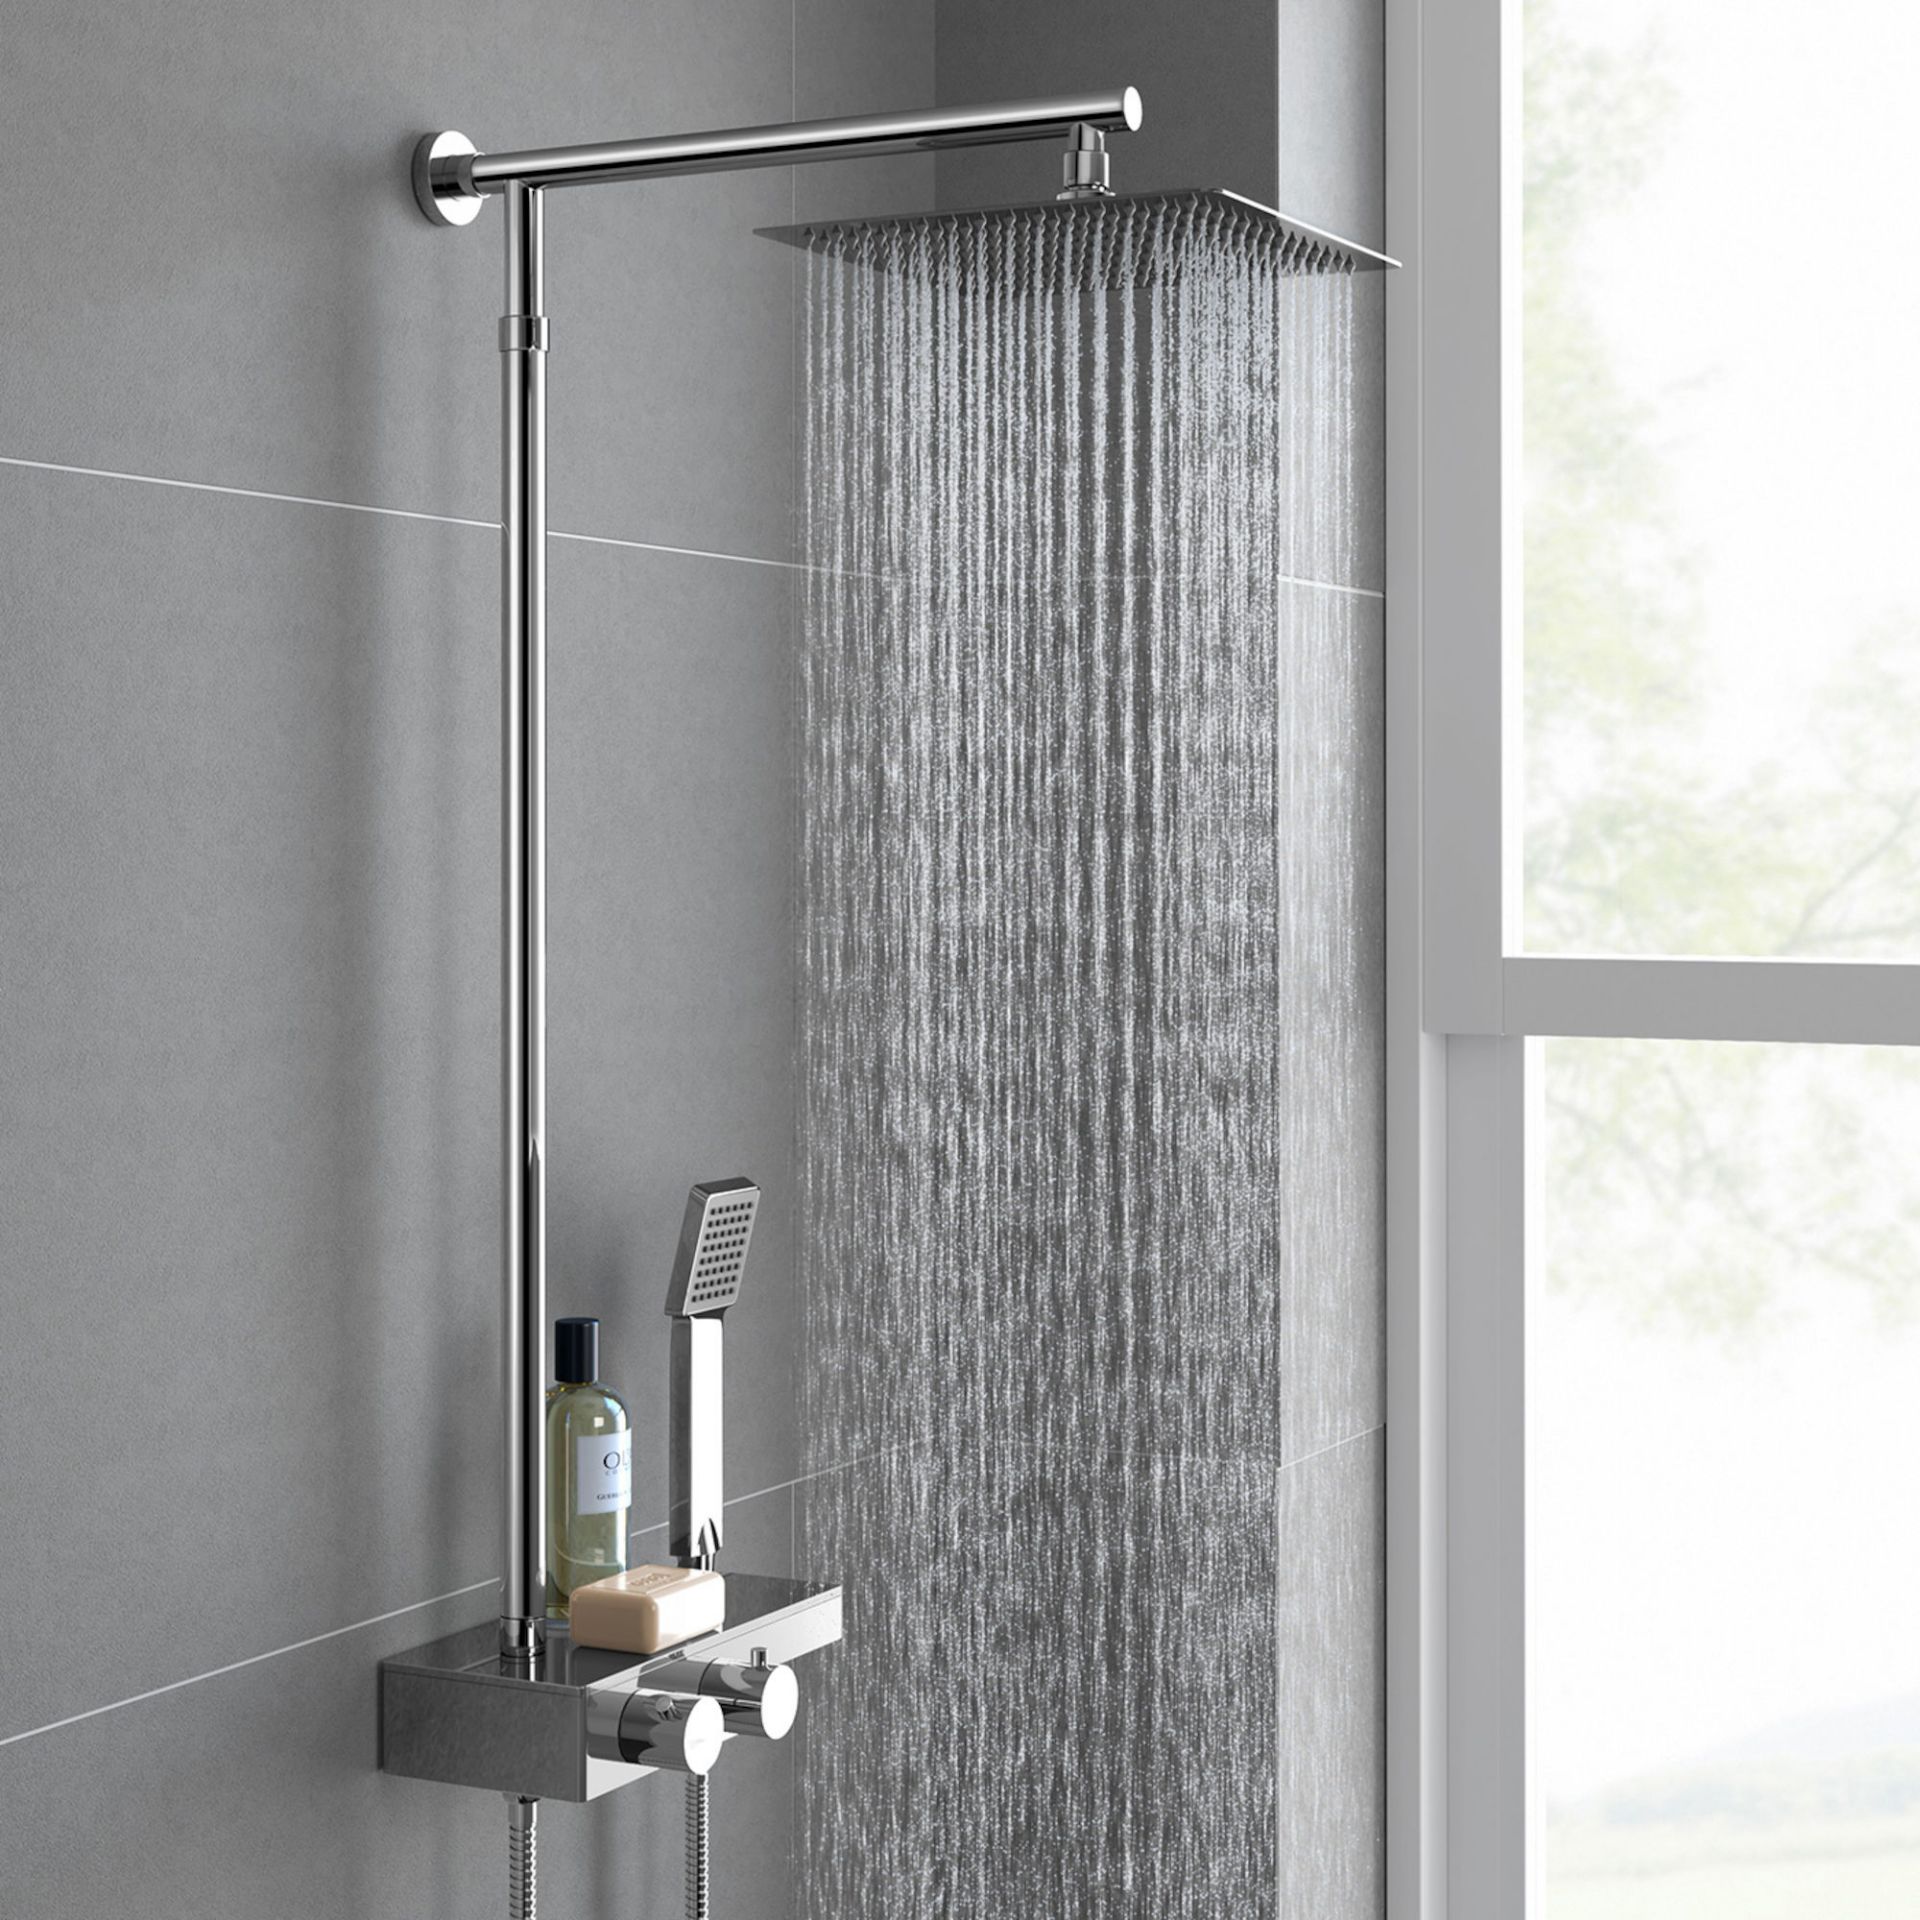 (YC31) Square Exposed Thermostatic Shower Shelf, Kit & Large Head. Style meets function with our - Image 2 of 4